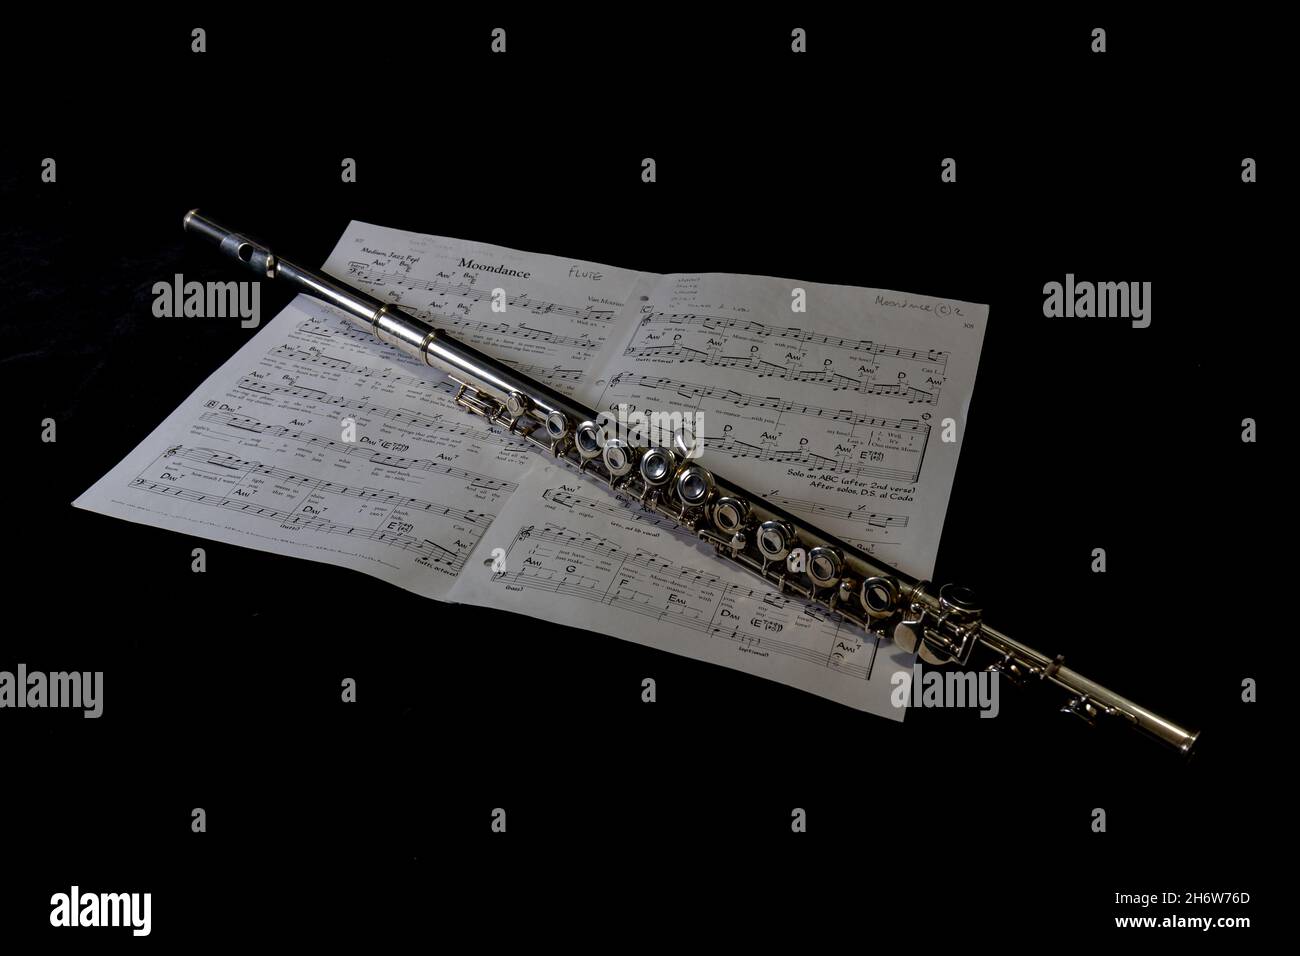 Flute and Moondance Stock Photo